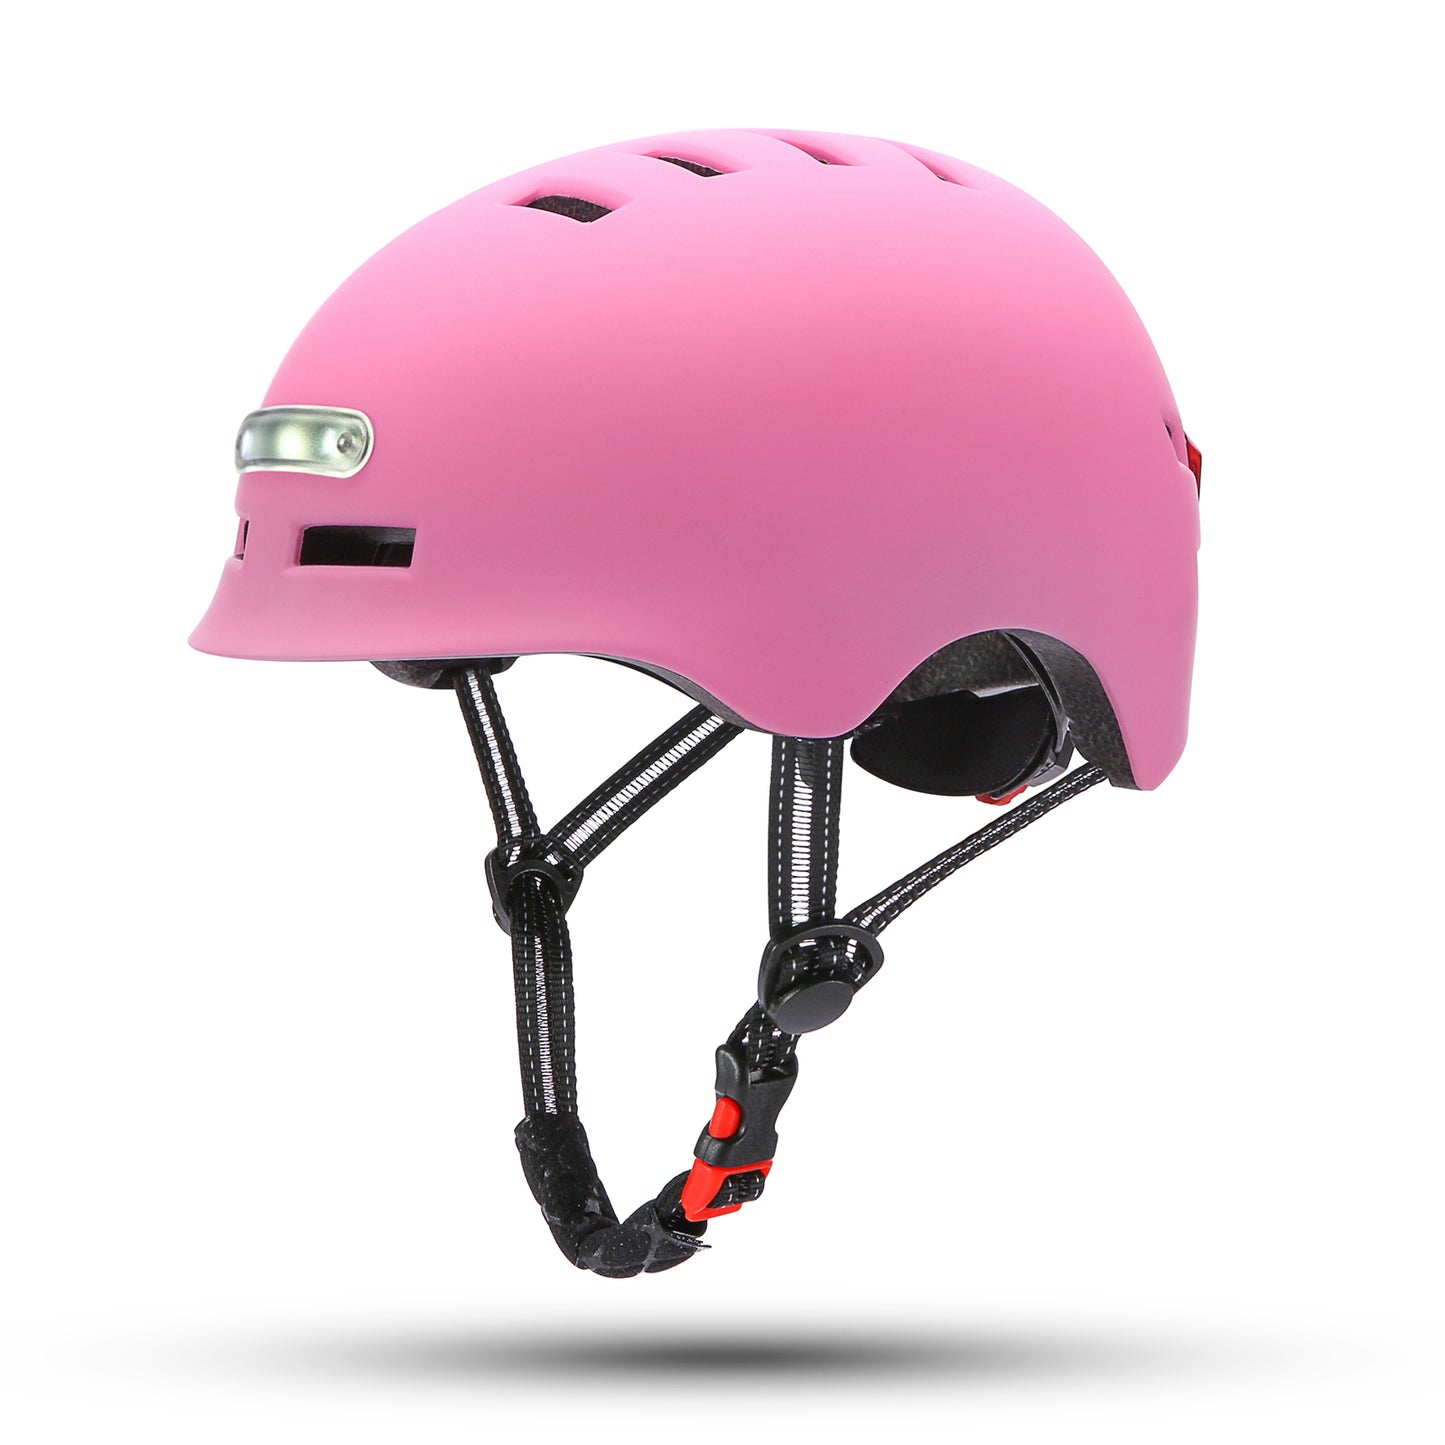 Gudook Manufacturer Classic Bicycle Helmet with LED